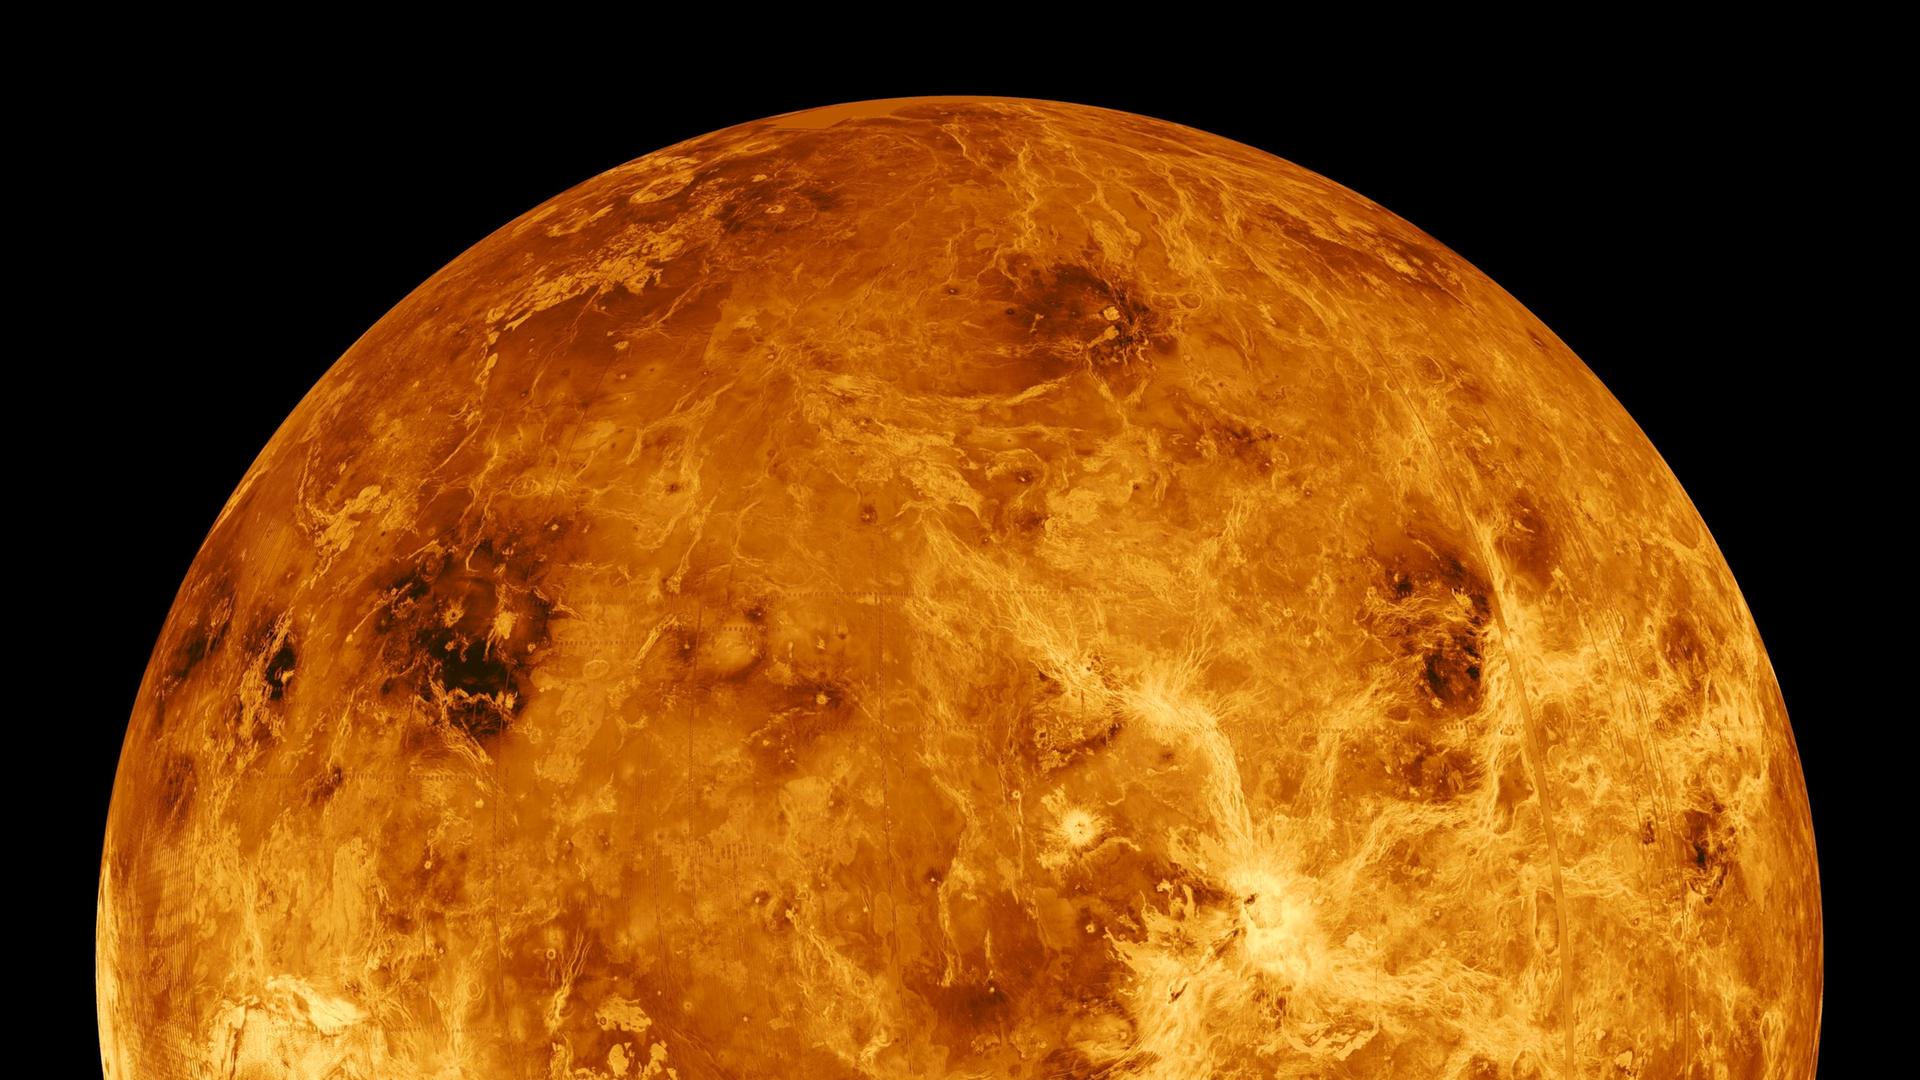 FILE - This image made available by NASA shows the planet Venus made with data produced by the Magellan spacecraft and Pioneer Venus Orbiter from 1990 to 1994. On Thursday, June 10, 2021, the European Space Agency said it will launch a Venus-orbiting spacecraft in the early 2030s. Named EnVision, the orbiter will attempt to explain why Venus is so âwildly differentâ from Earth, even though the two planets are similar in size and composition. (NASA/JPL-Caltech via AP)